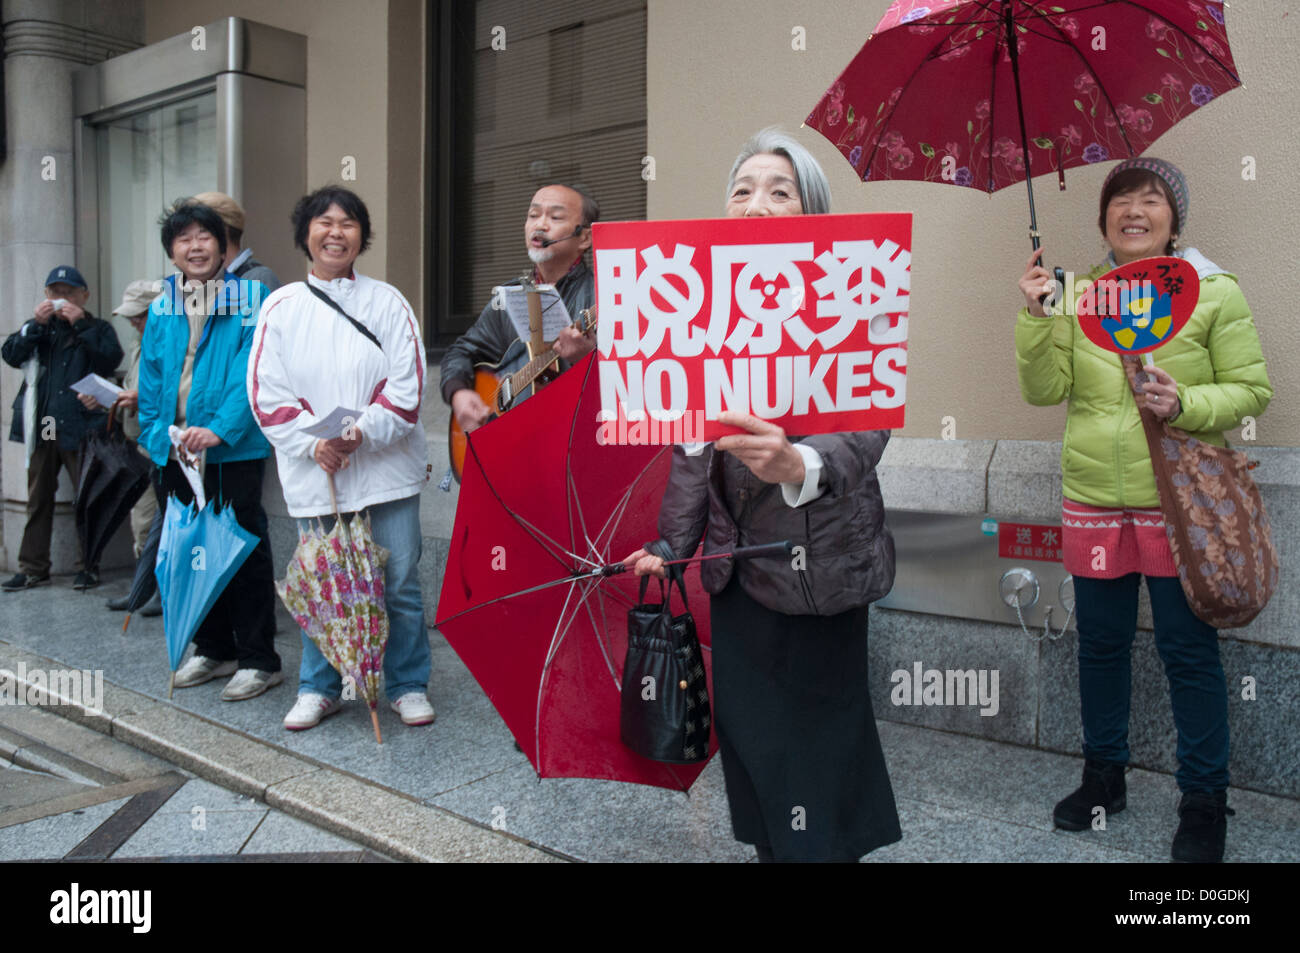 Anti-nuclear protestors demonstrating in downtown Kyoto, Japan Stock Photo